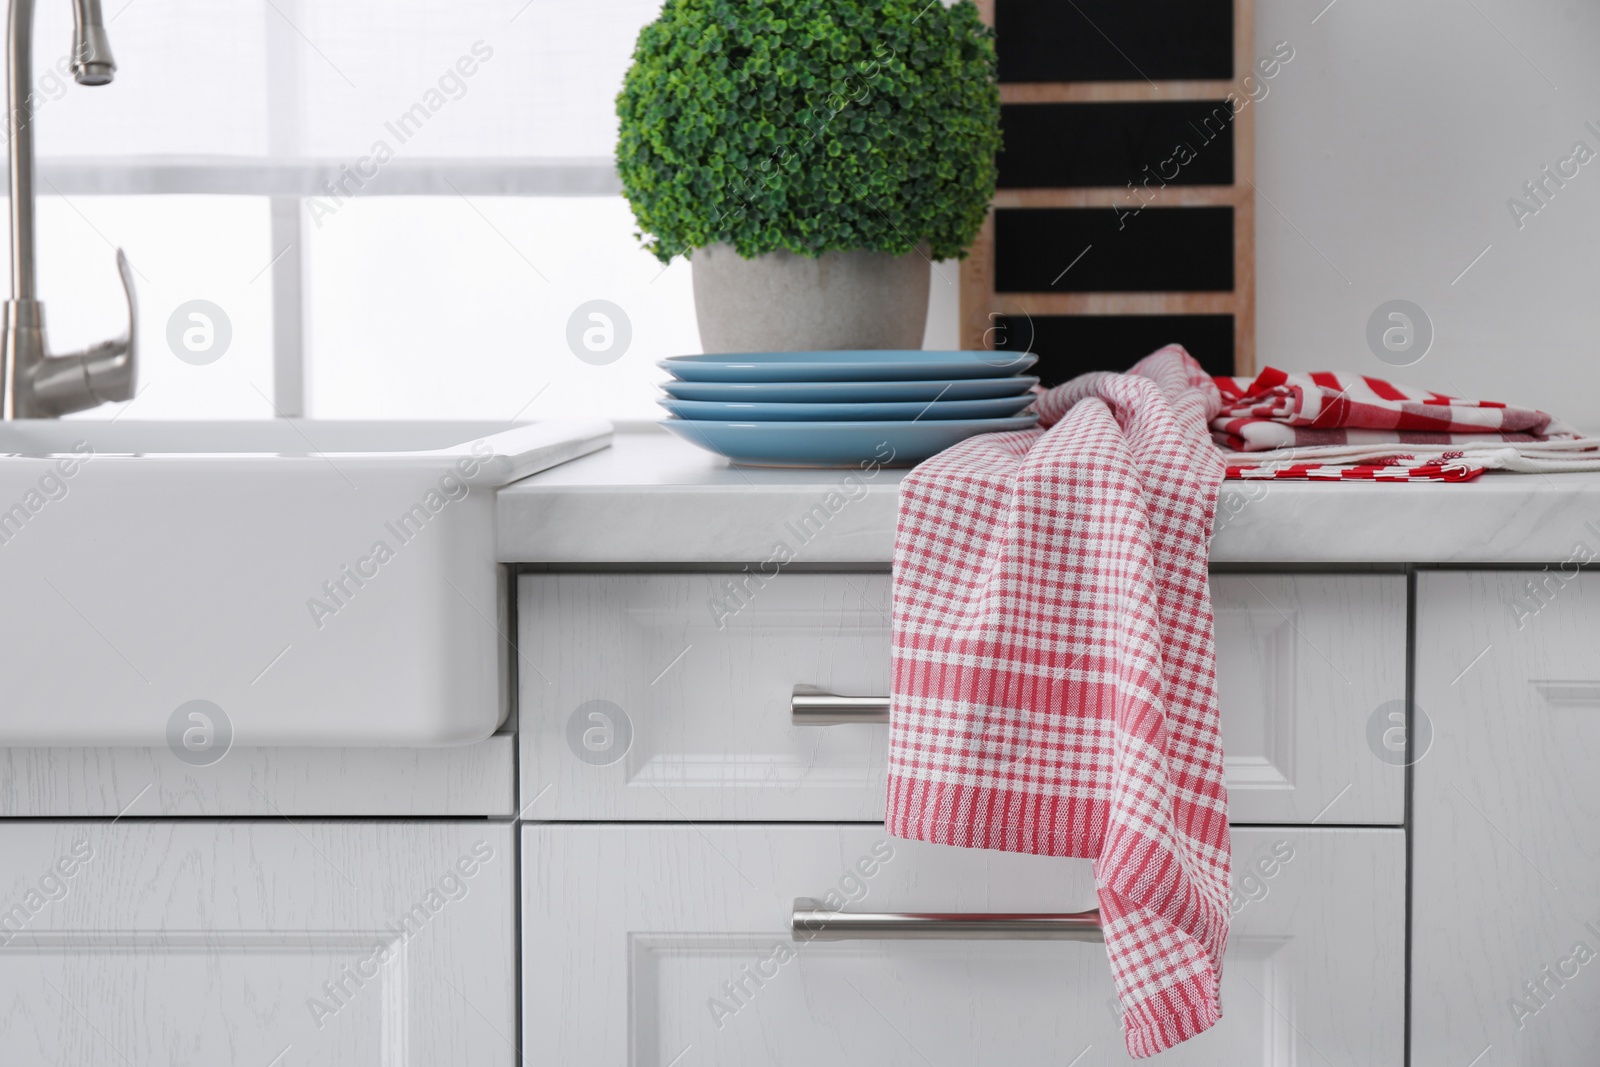 Photo of Different towels and stack of plates near sink on kitchen counter